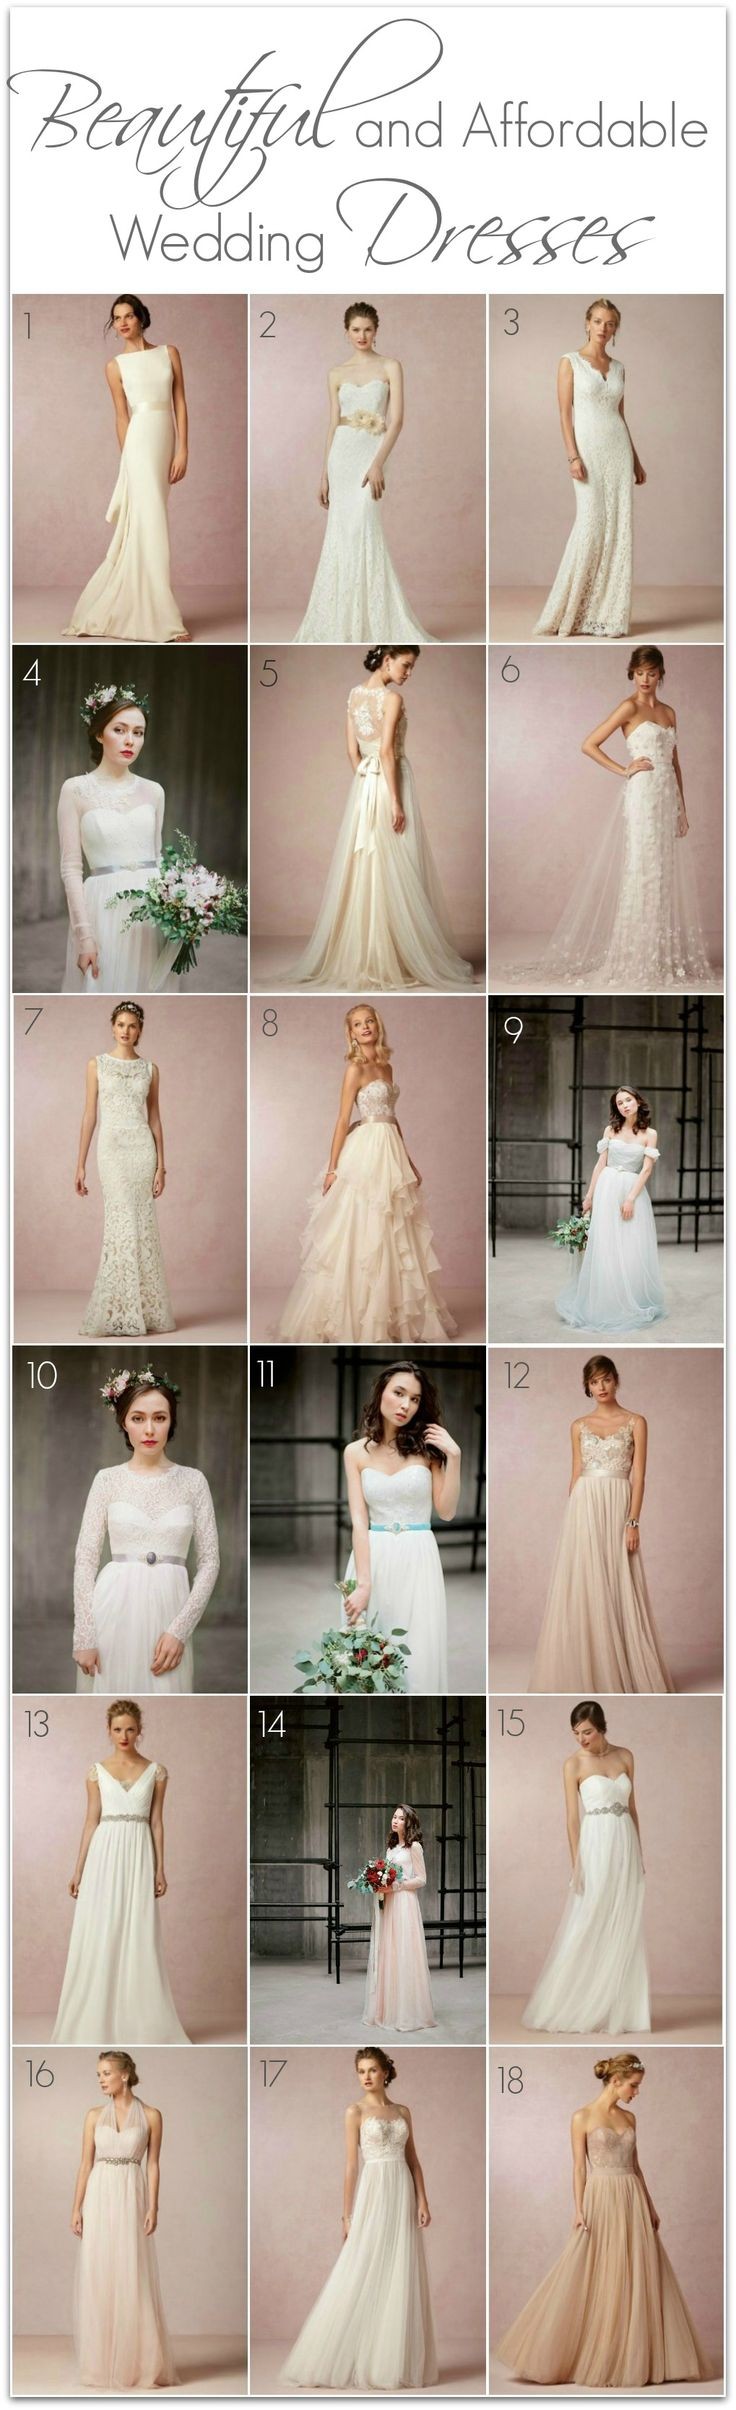 My top picks for affordable wedding dresses that a...